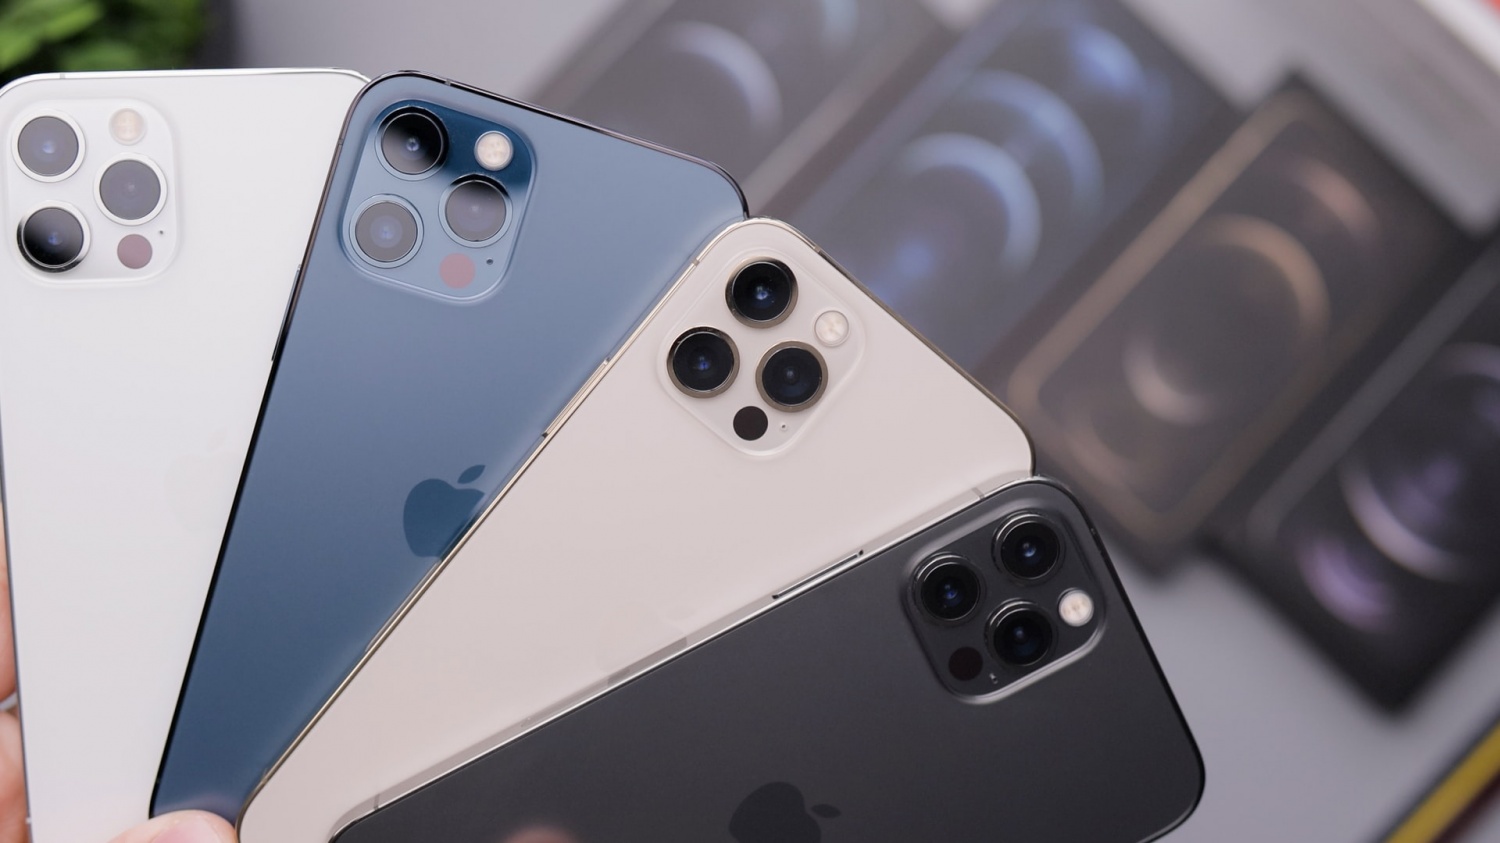 iPhone 13 Leak Confirms Bigger Battery, Faster 5G; Teases Competitive Price